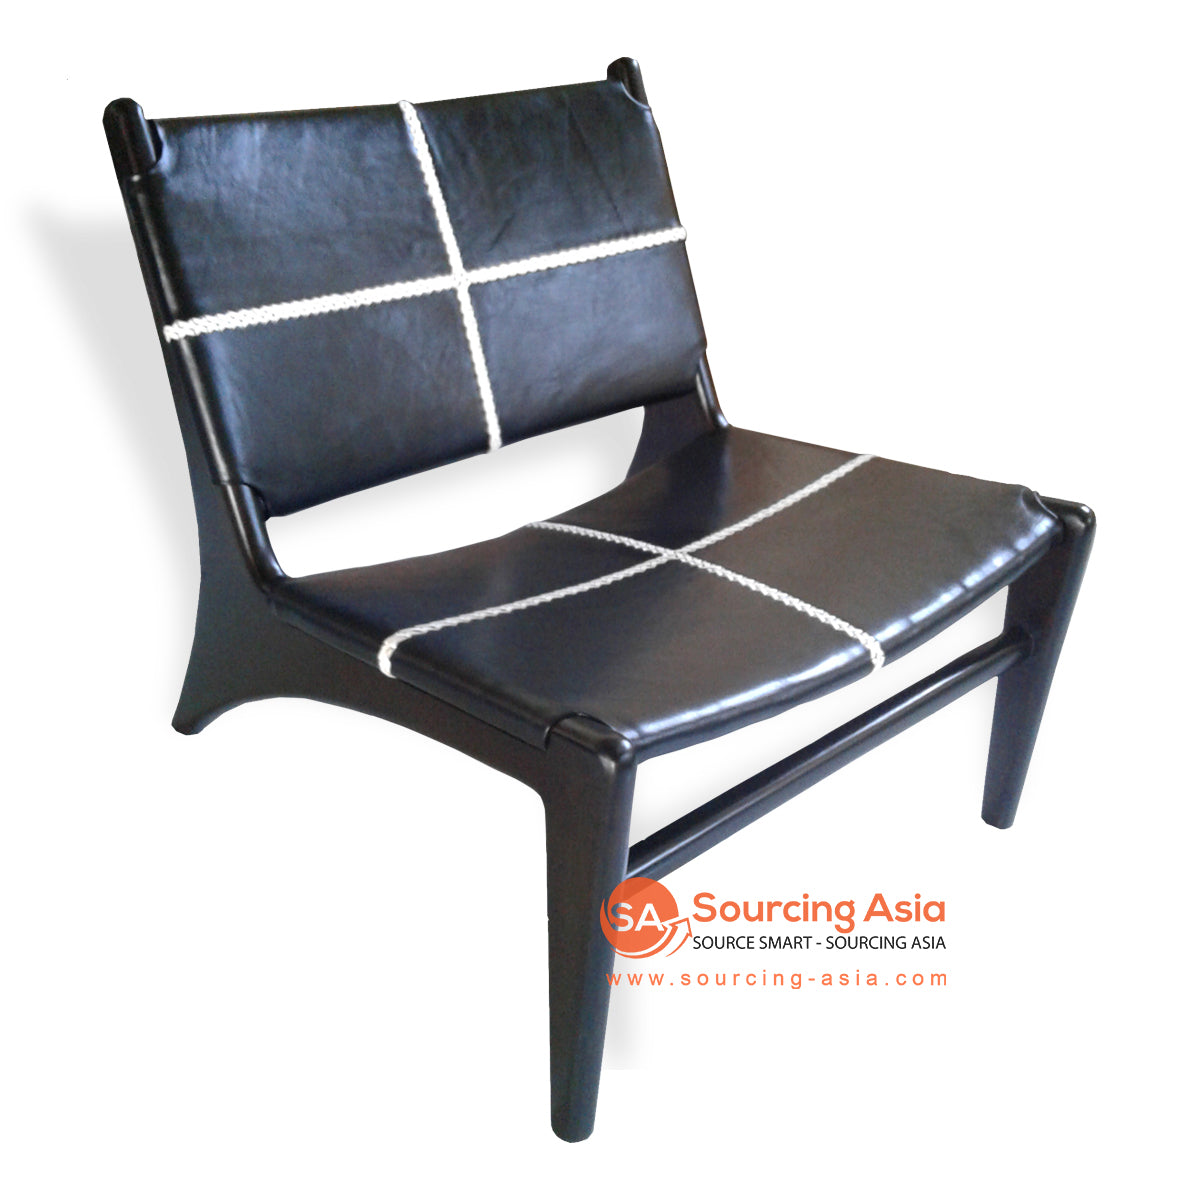 KUSJ085 BLACK AND WHITE LEATHER WITH DARK BROWN FRAME TEAK WOOD KAISAR LAZY CHAIR